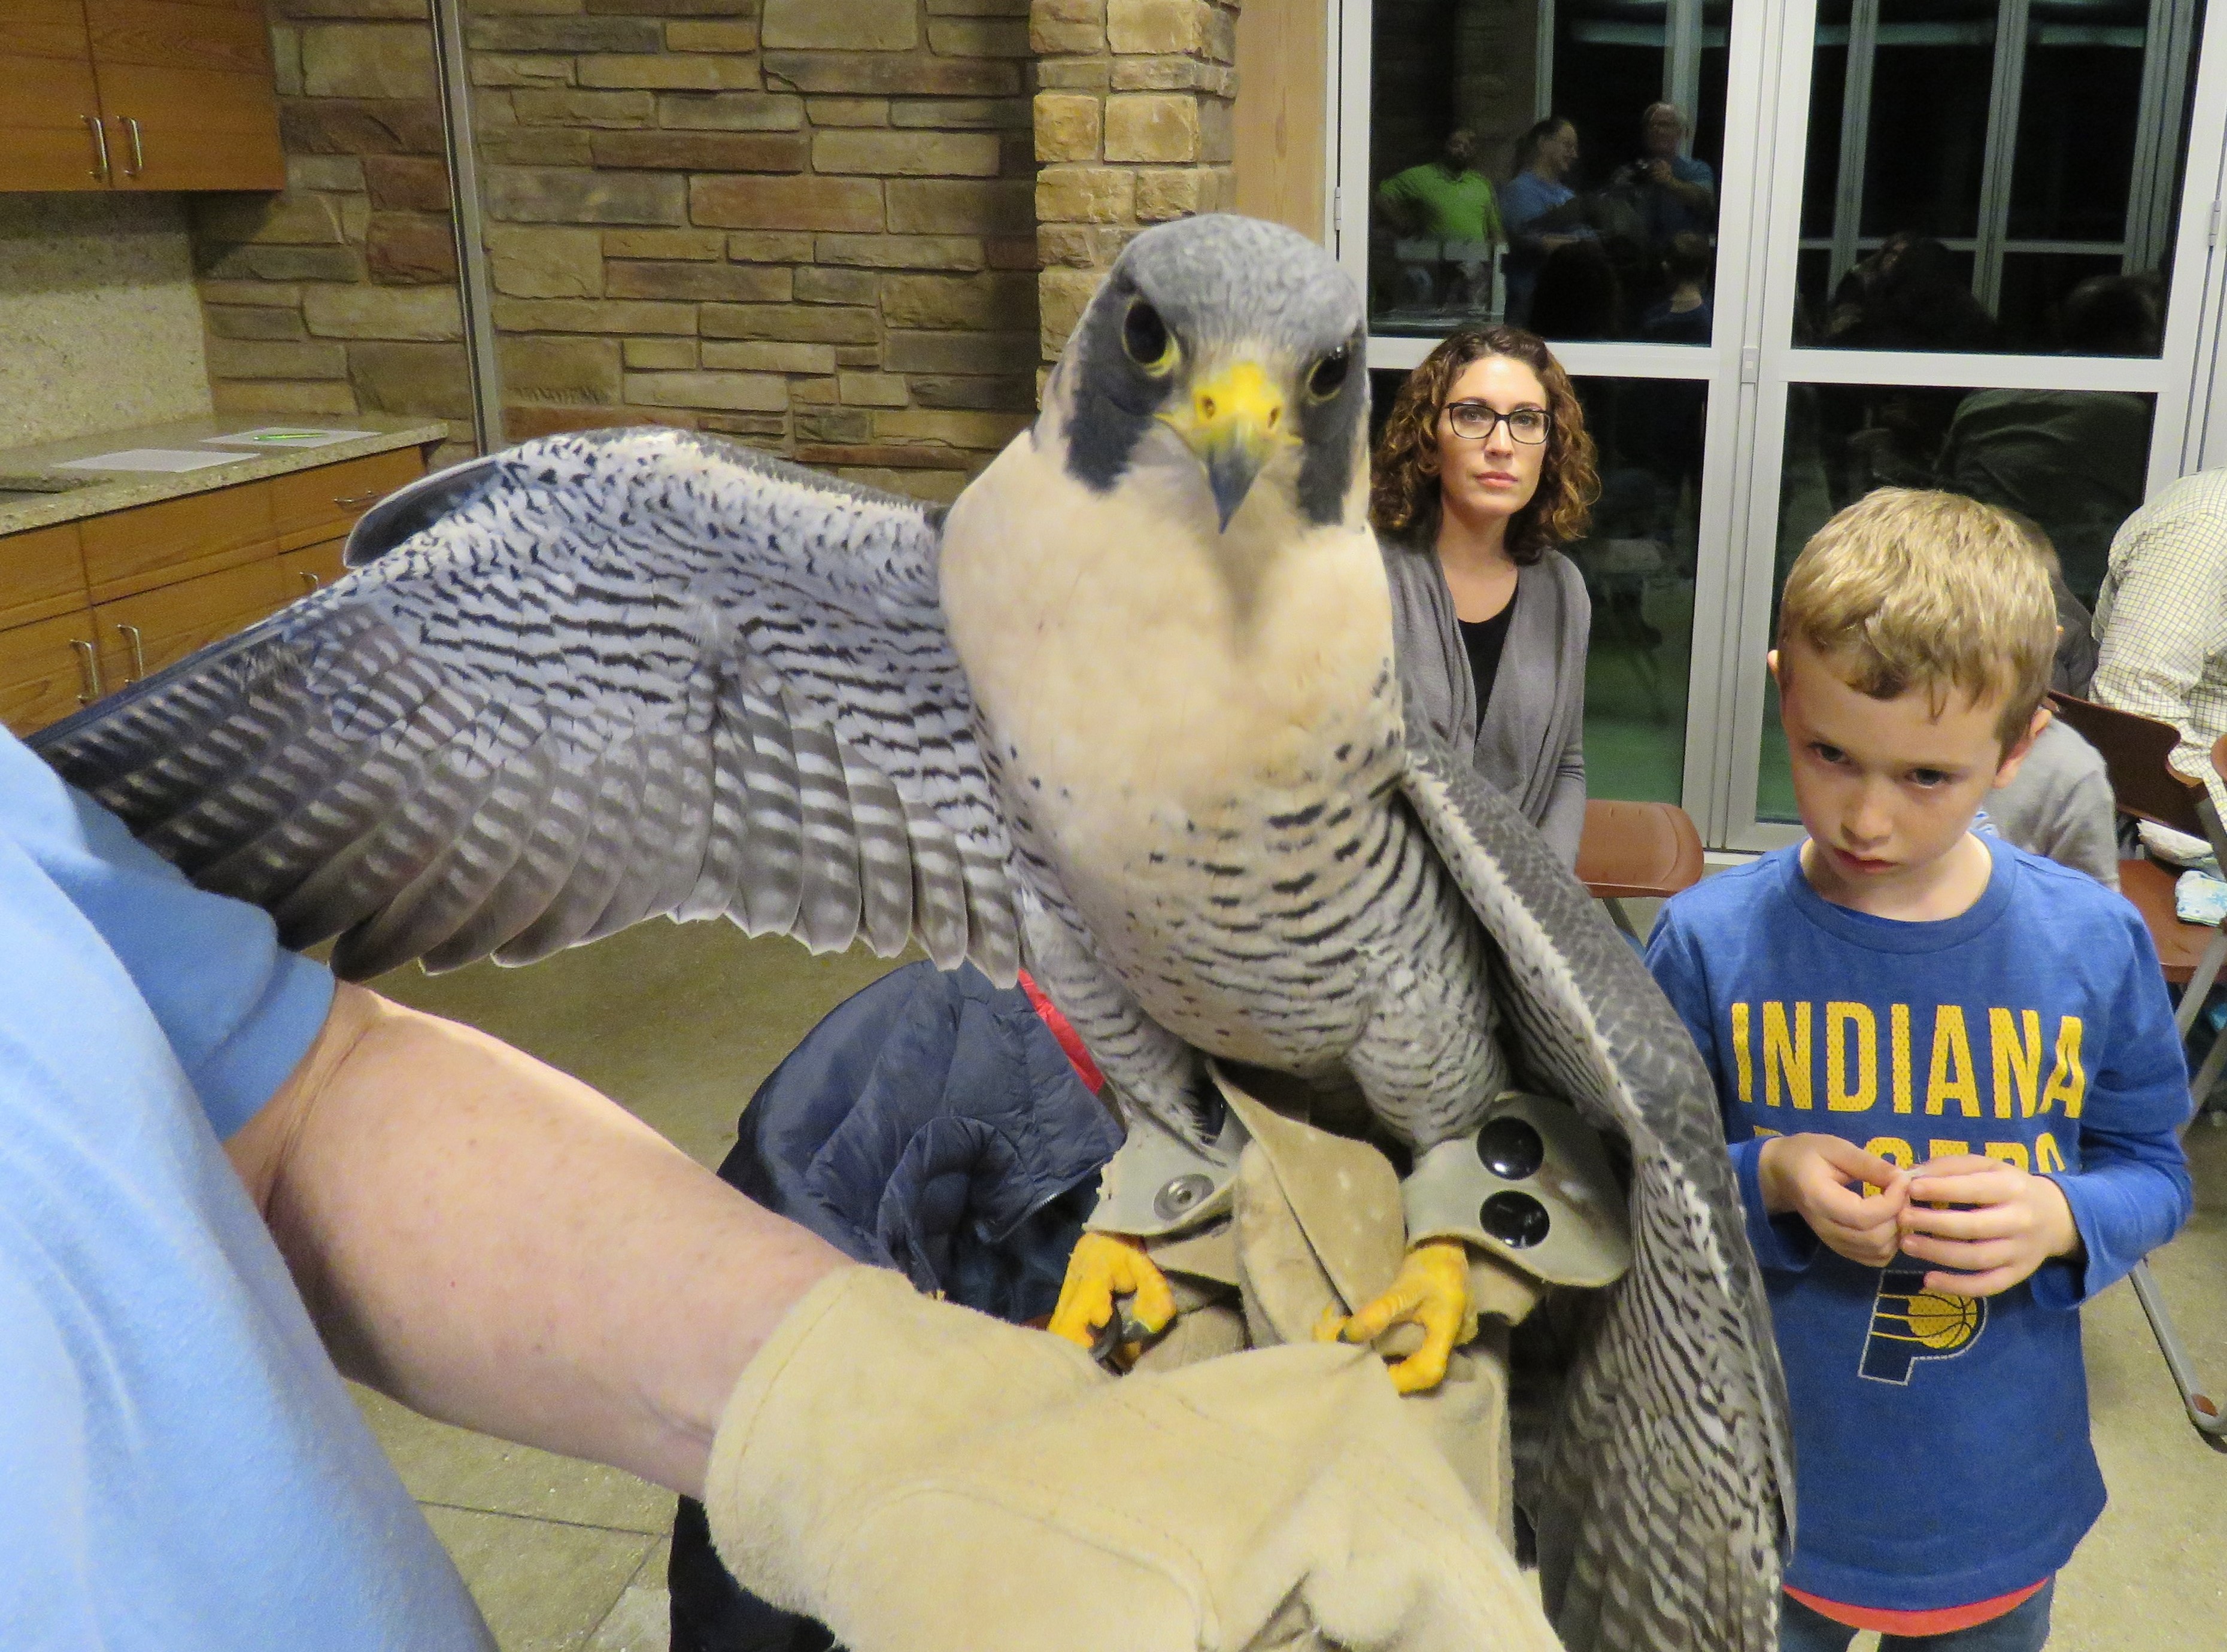 A peregrine falcon spreads one wing while perched on a gloved hand.